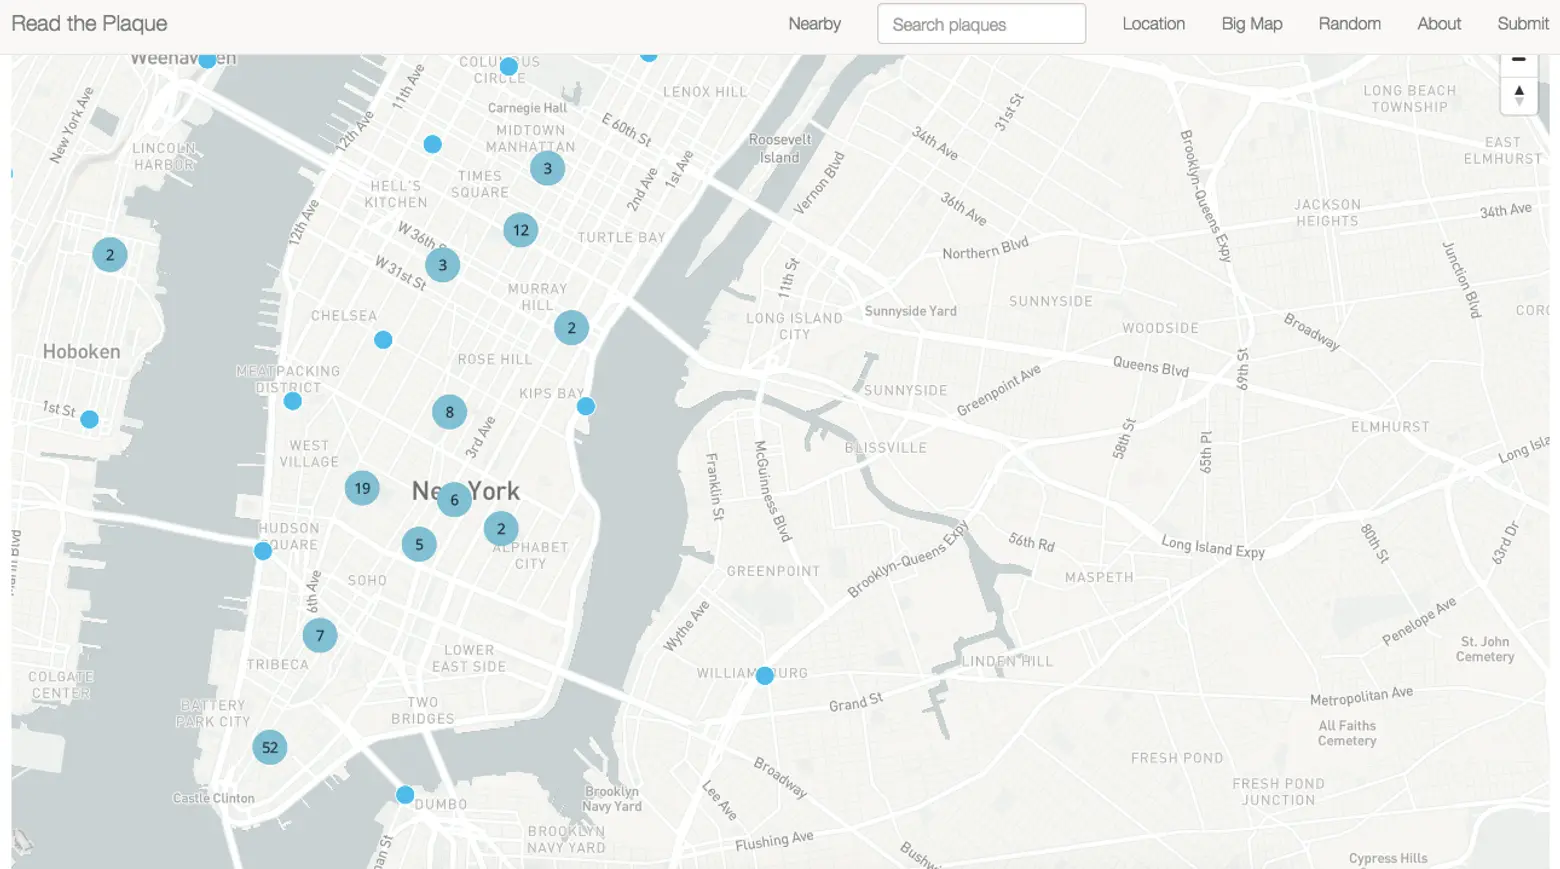 This tool maps thousands of plaques around the world, including hundreds near NYC